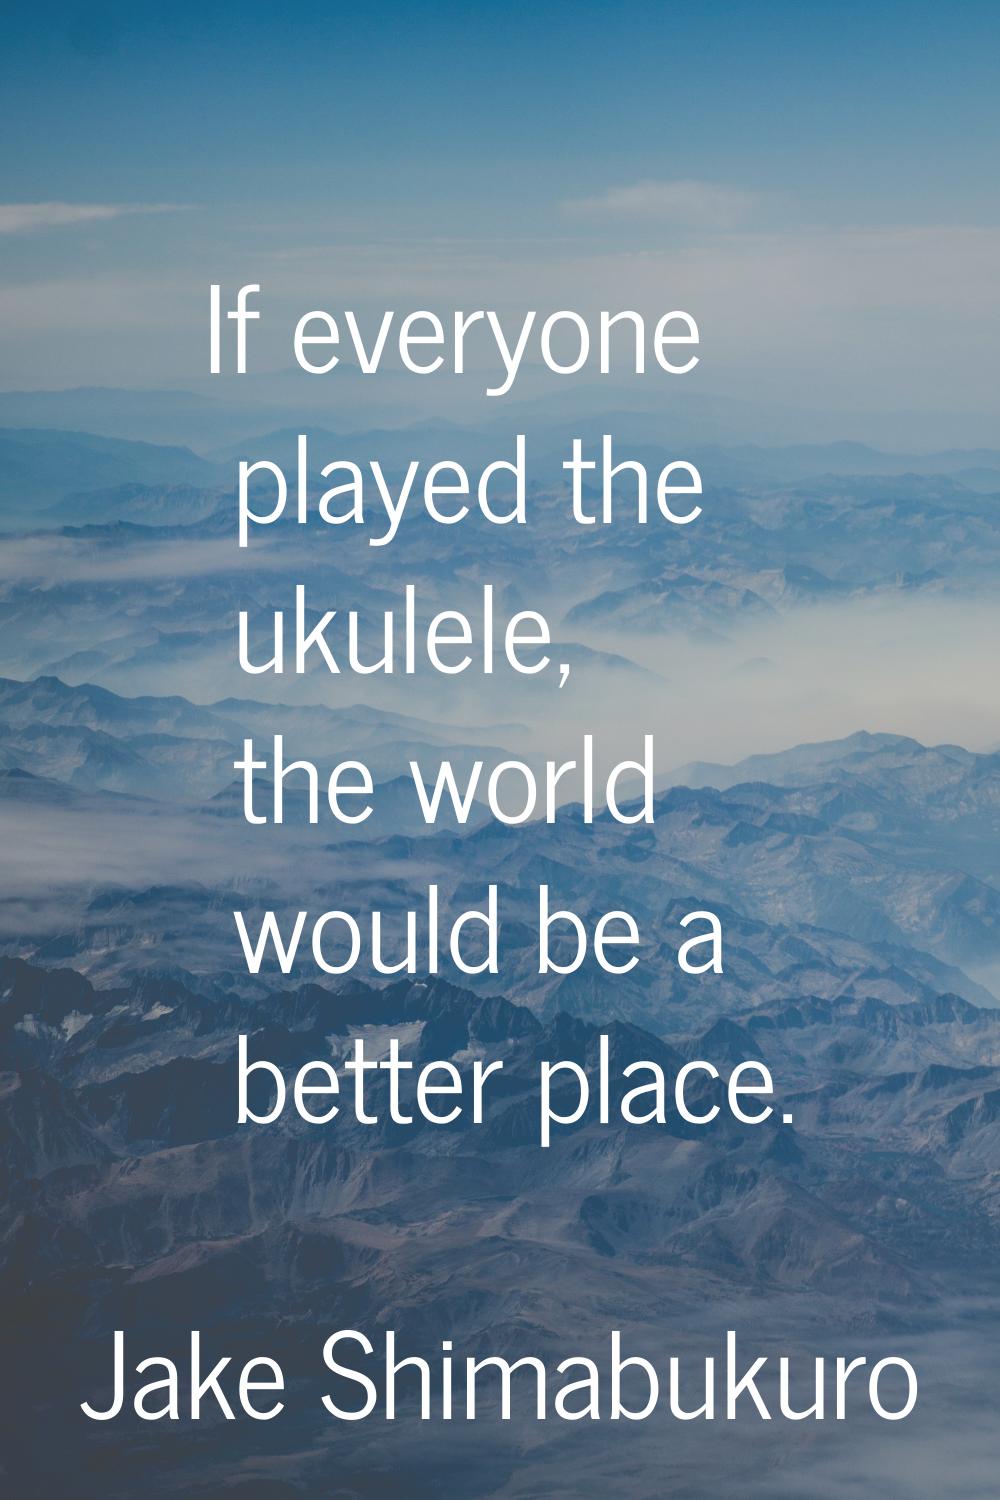 If everyone played the ukulele, the world would be a better place.